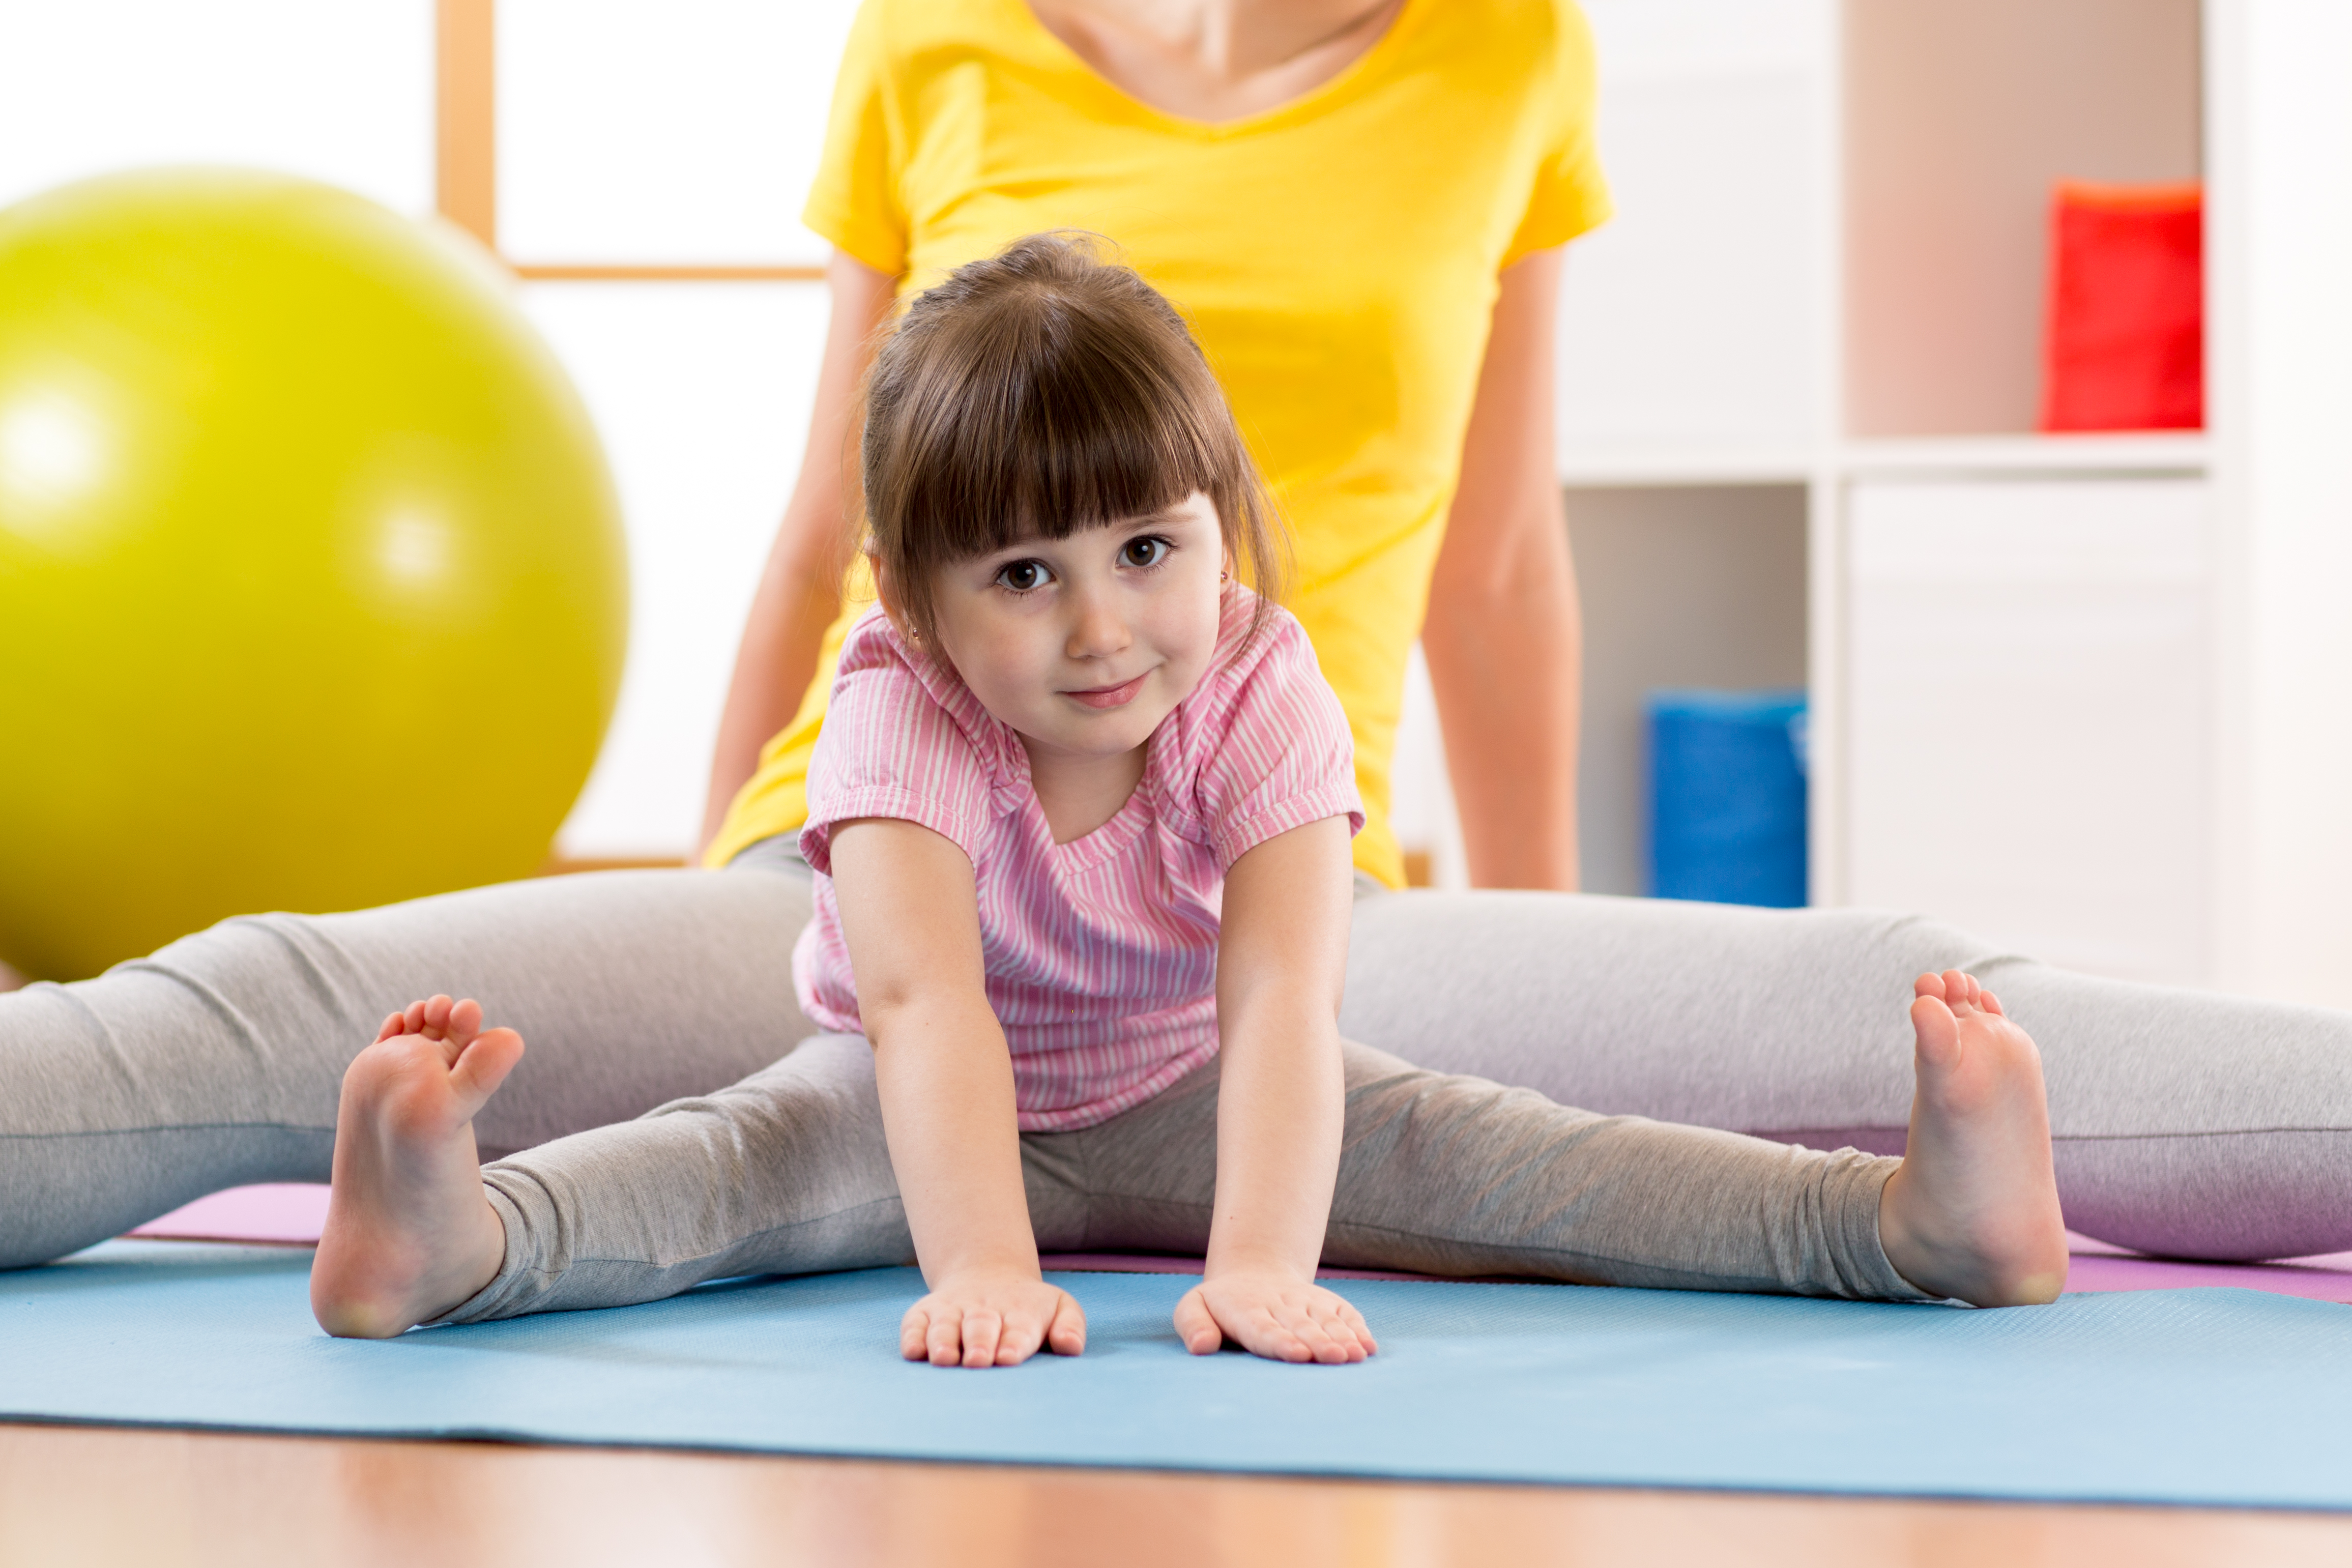 Making Physical Activity a Part of a Child's Life, Physical Activity